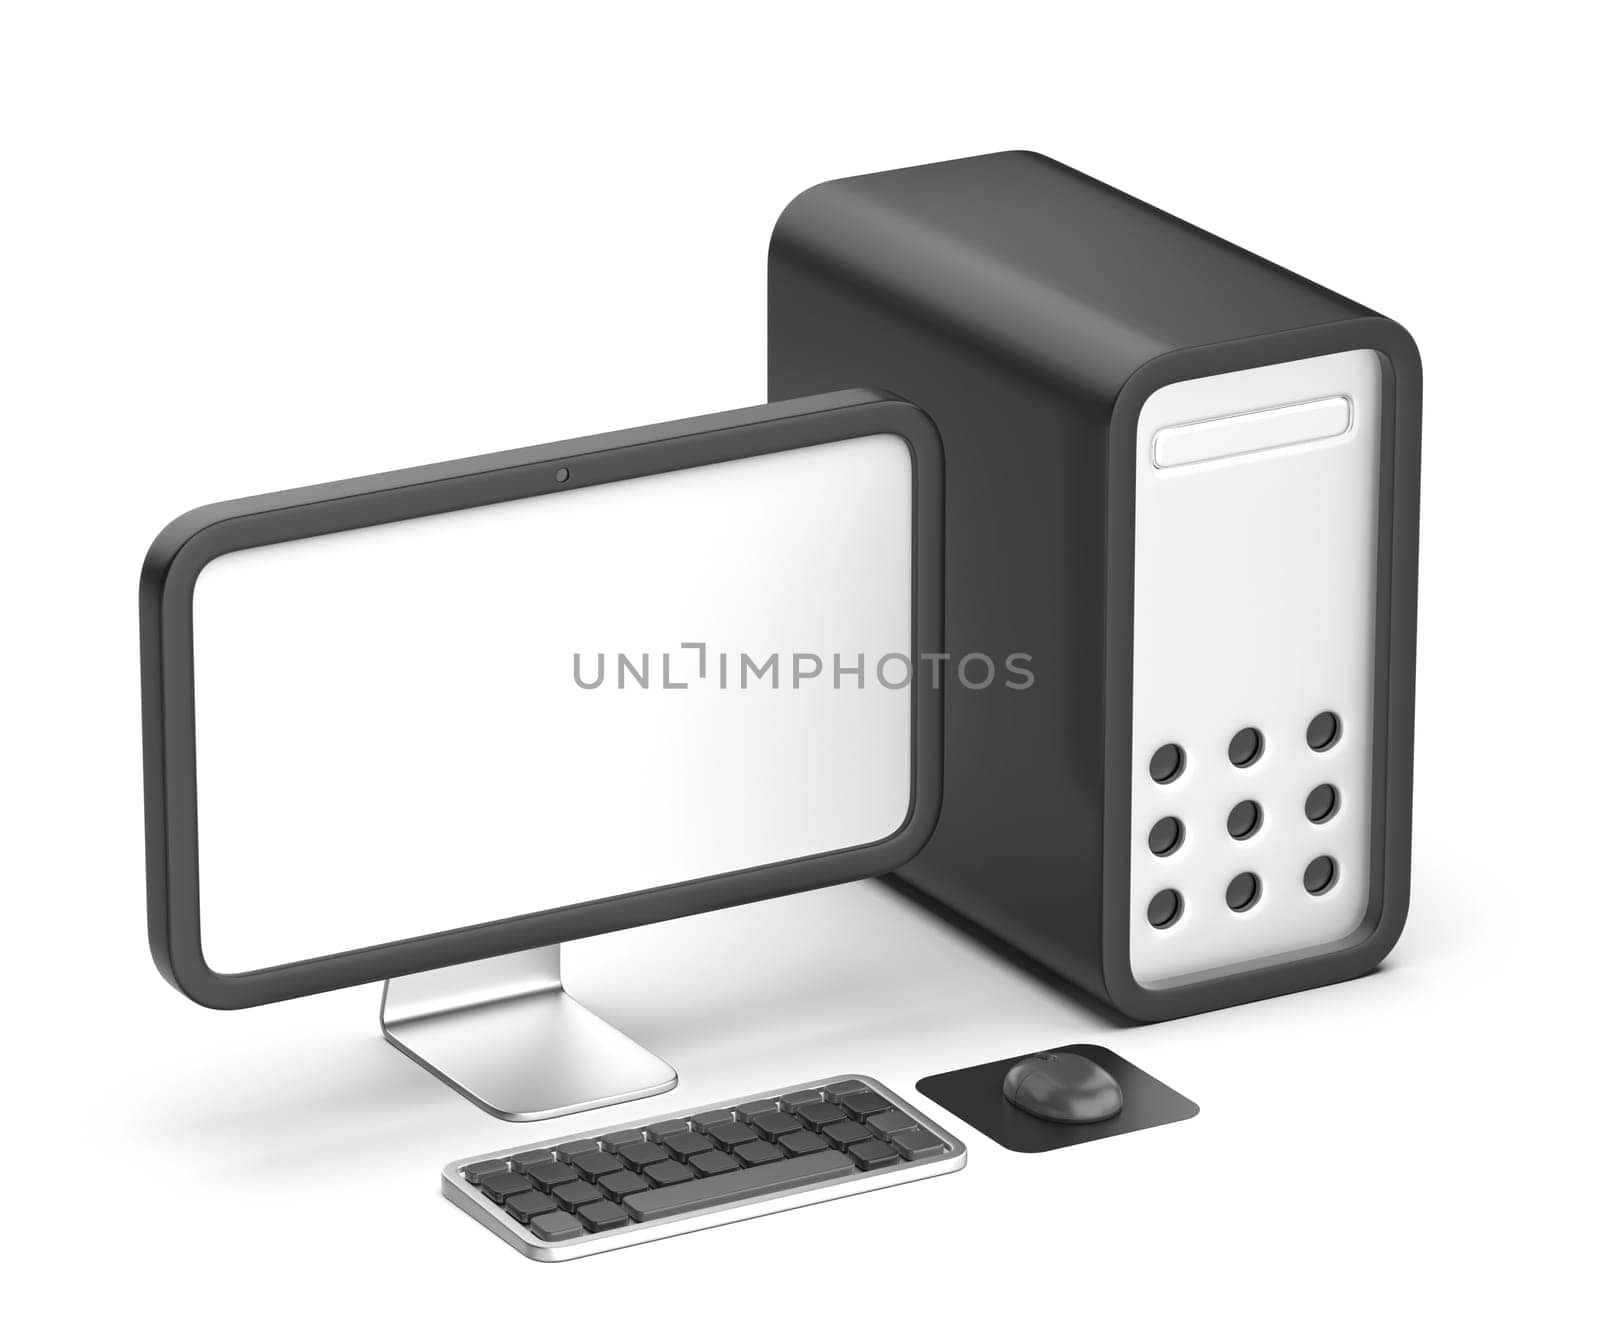 Simple desktop computer with monitor, keyboard and mouse
 by magraphics